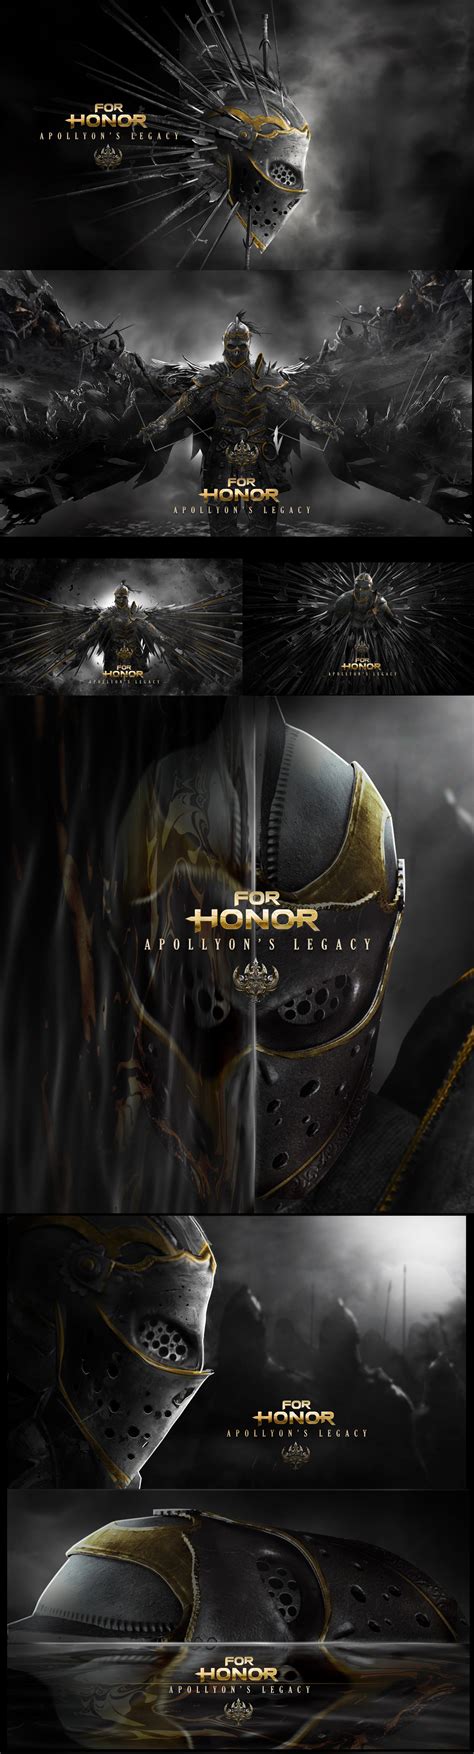 Want to discover art related to apollyon? For Honor Apollyon's Legacy on Behance